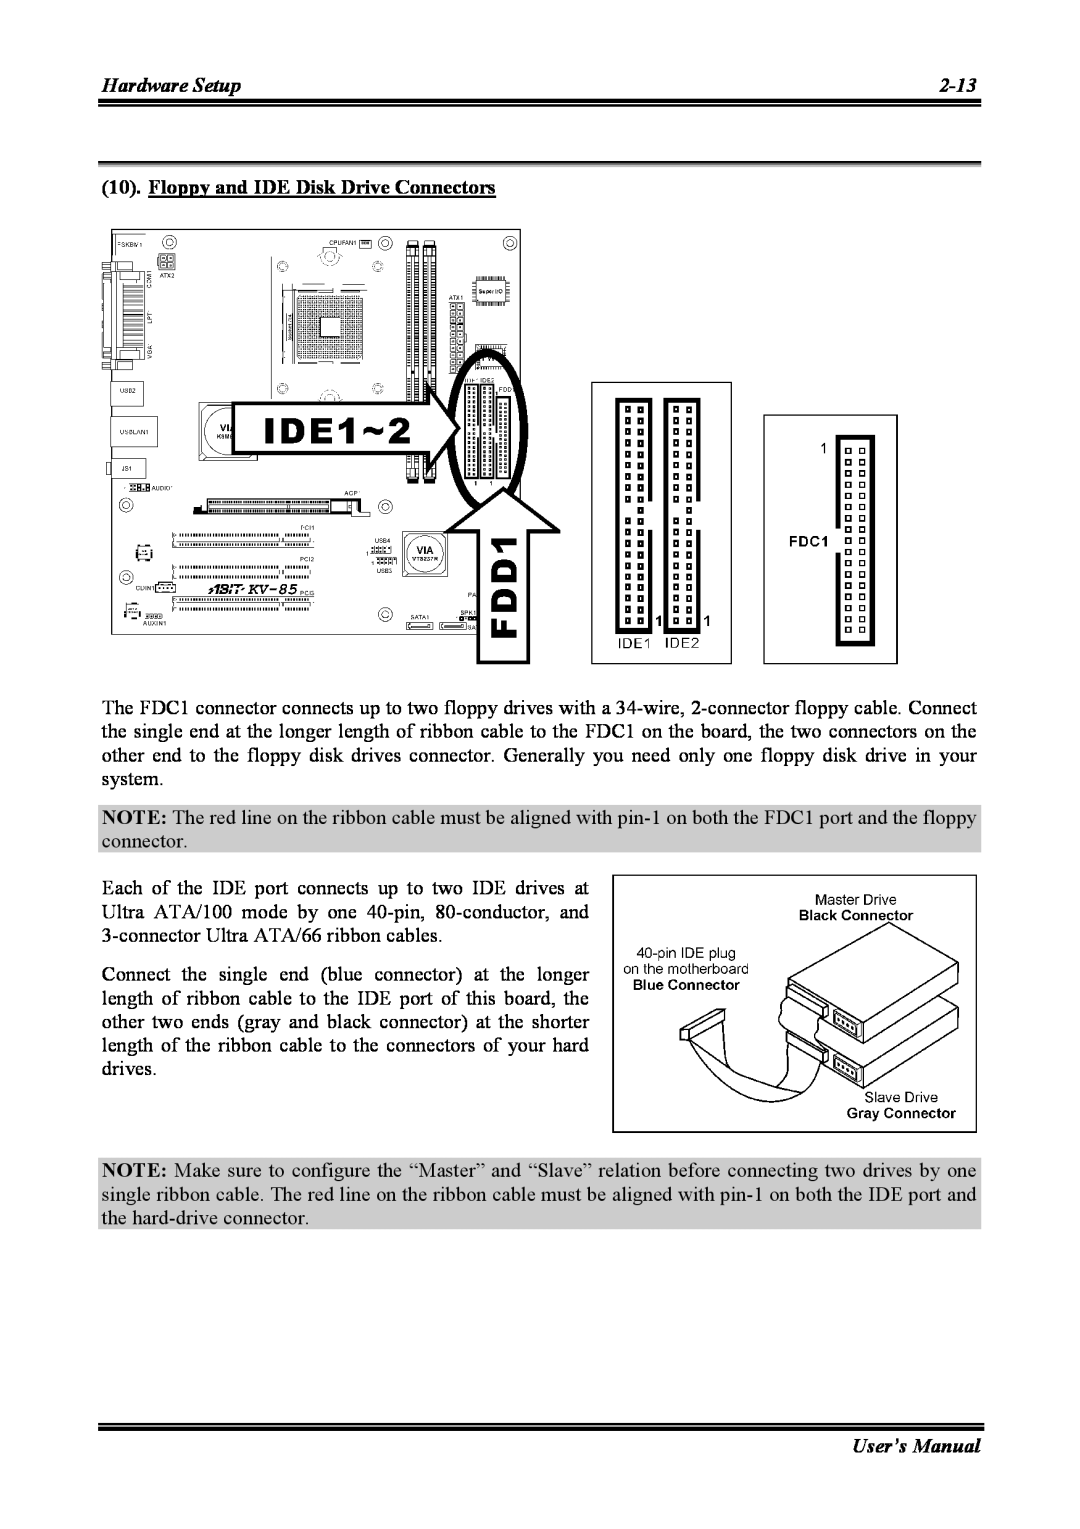 Abit KV-85 user manual Floppy and IDE Disk Drive Connectors 